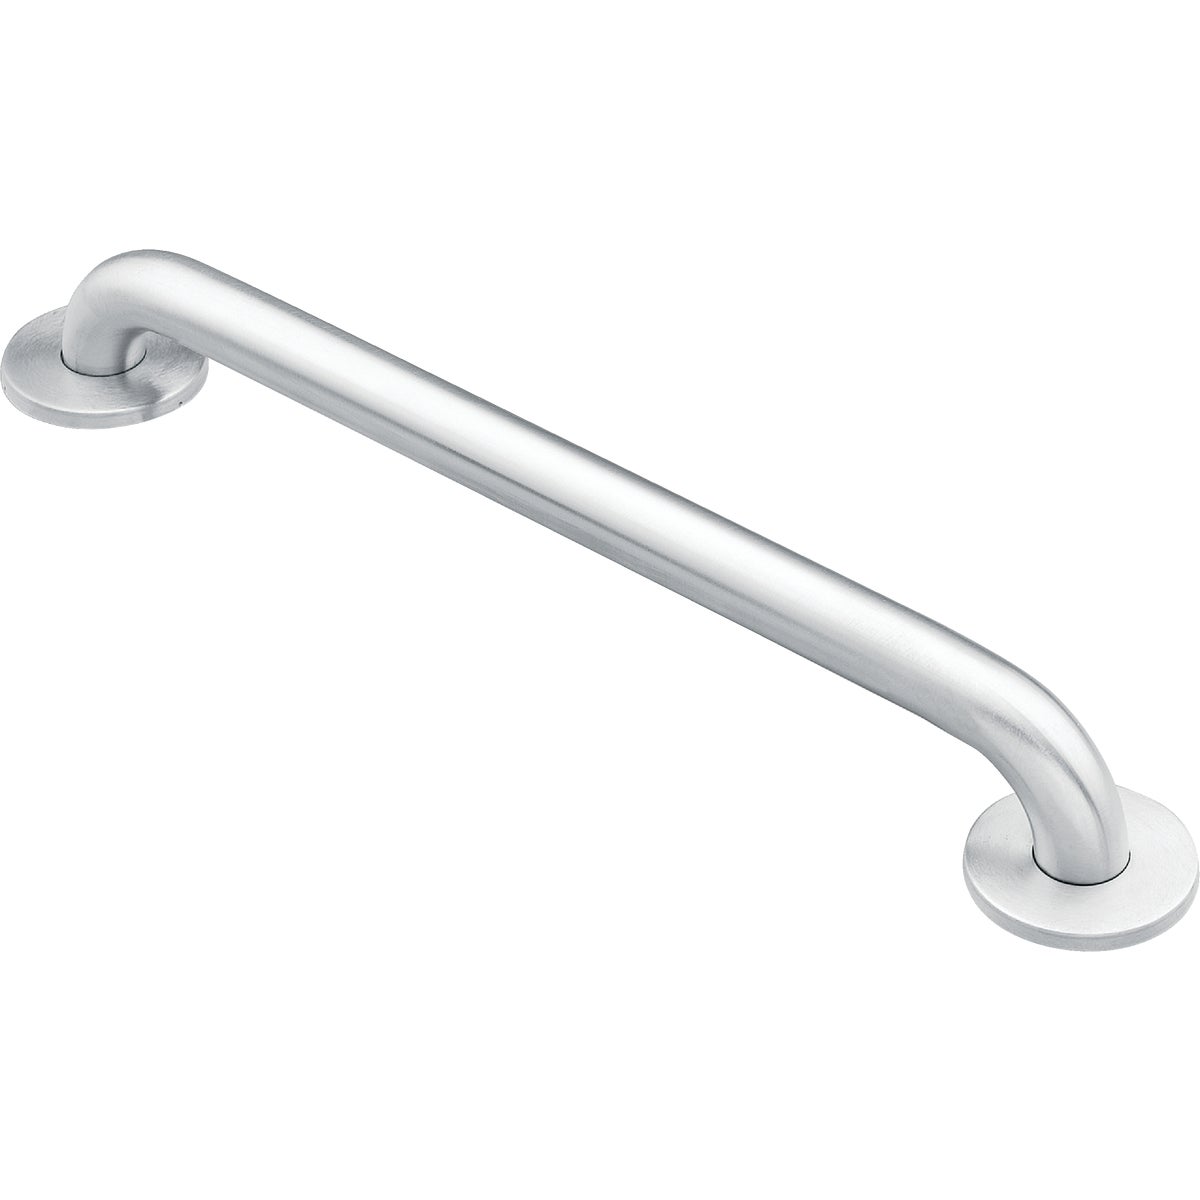 Moen Home Care 42 In. x 1-1/4 In. Concealed Screw Grab Bar, Stainless Steel